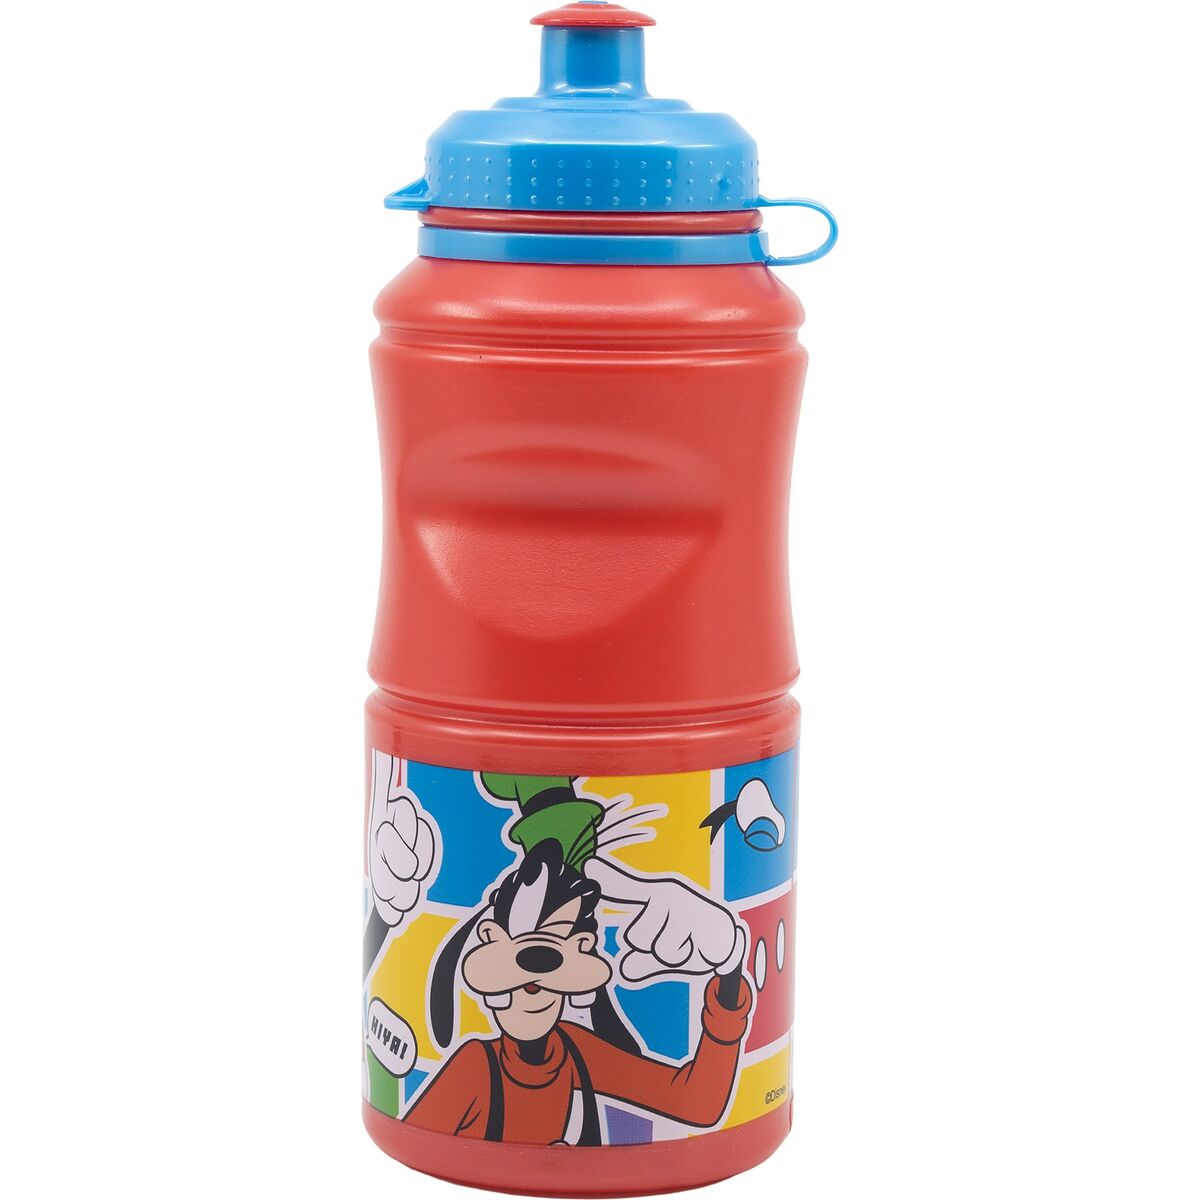 Water bottle Mickey Mouse CZ11345 Sporting 380 ml Red Plastic